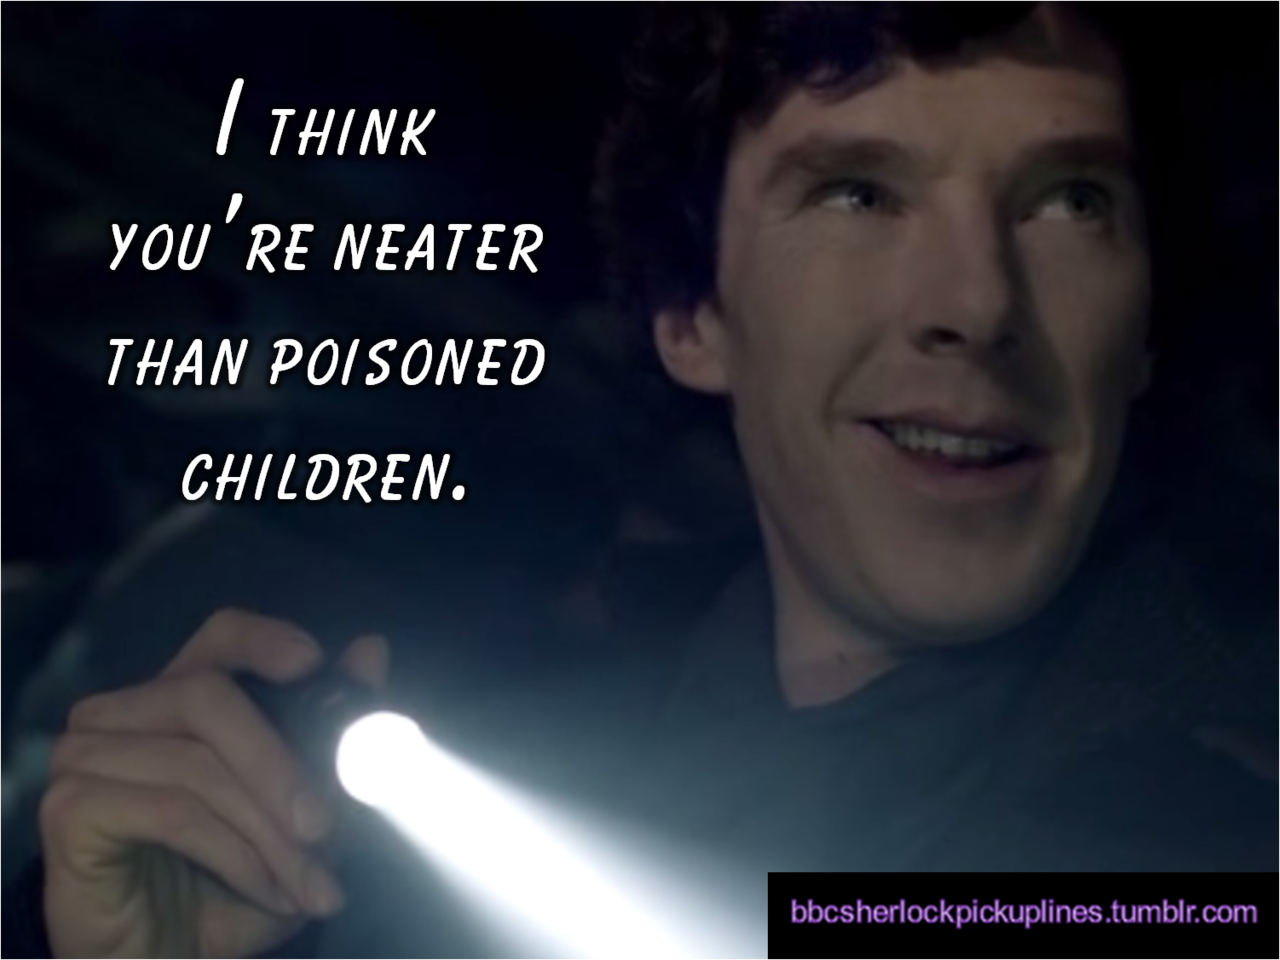 The best of series two references, from BBC Sherlock pick-up lines.